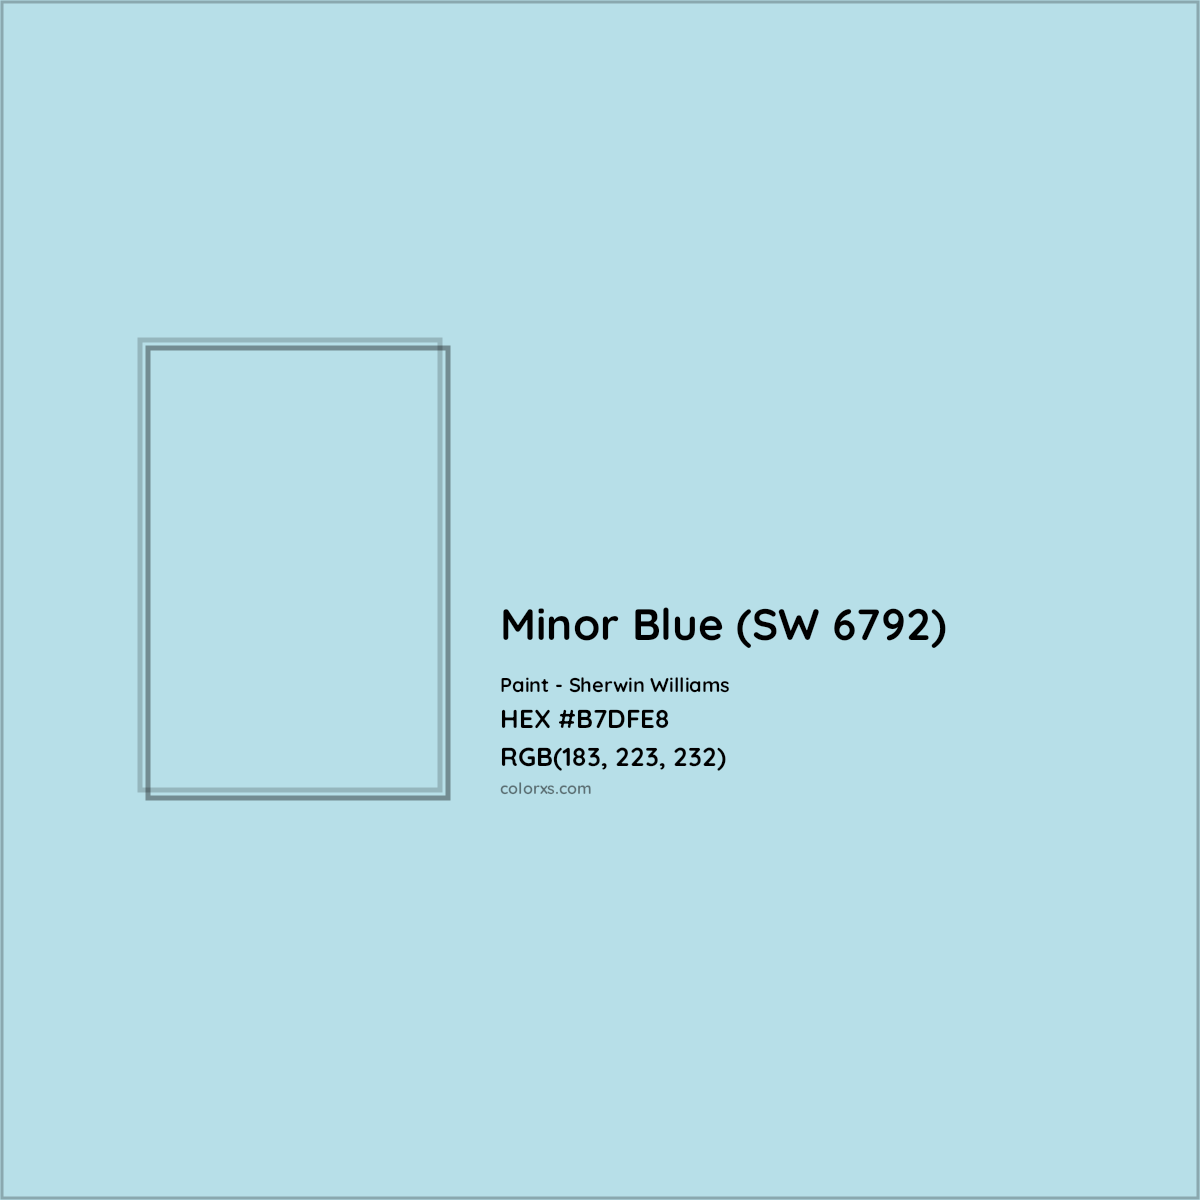 HEX #B7DFE8 Minor Blue (SW 6792) Paint Sherwin Williams - Color Code